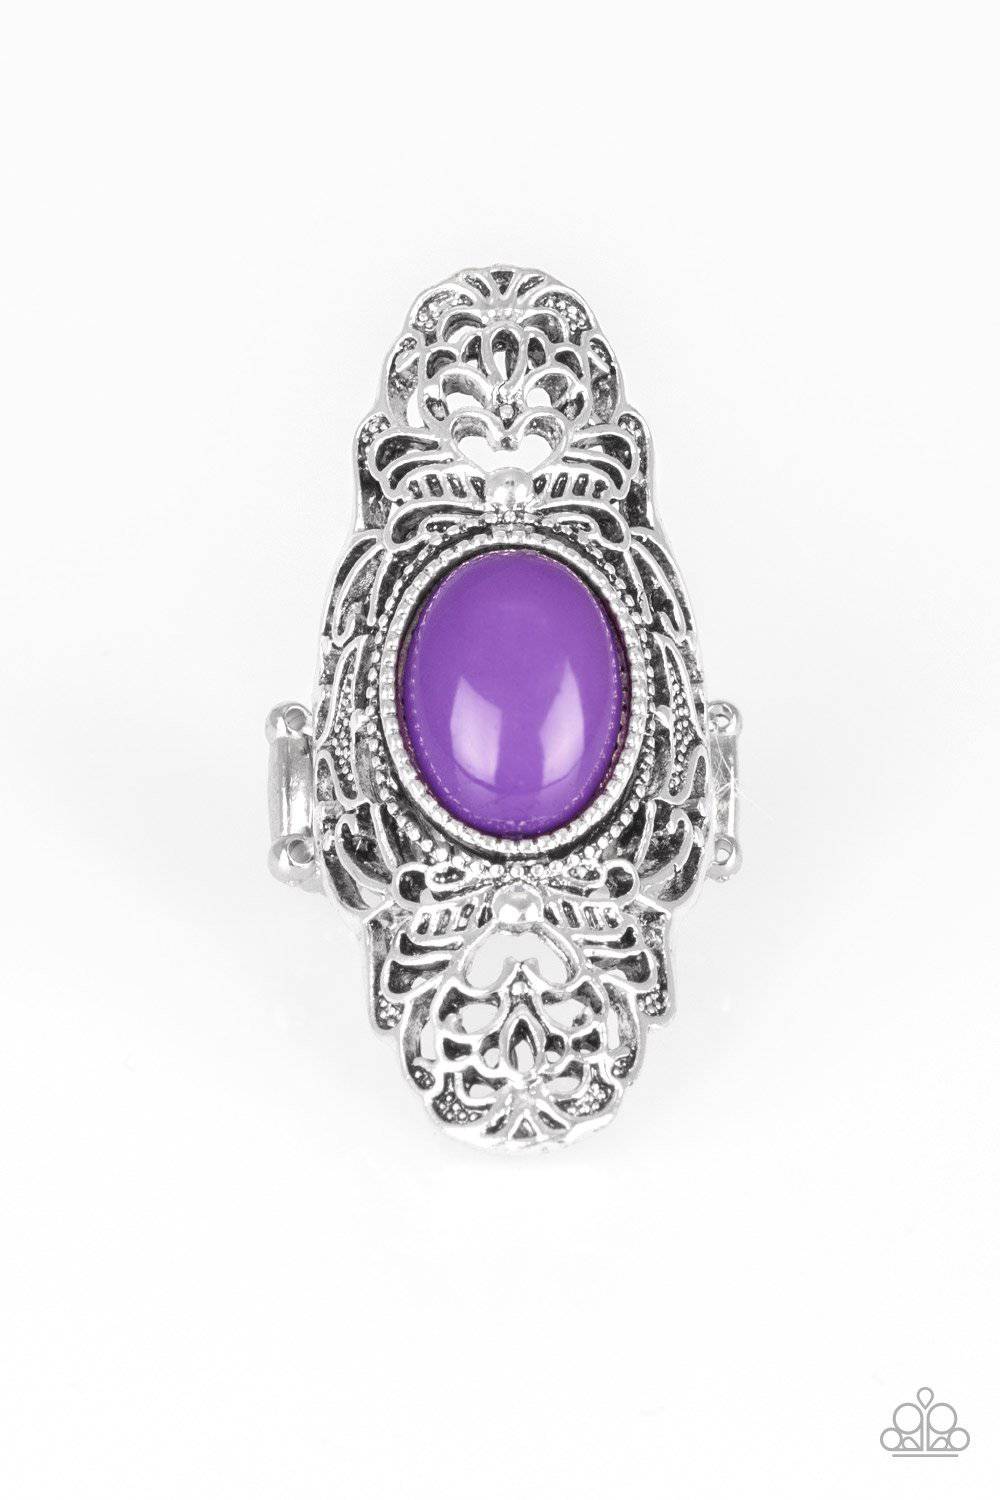 Flair for the Dramatic - Purple - GlaMarous Titi Jewels